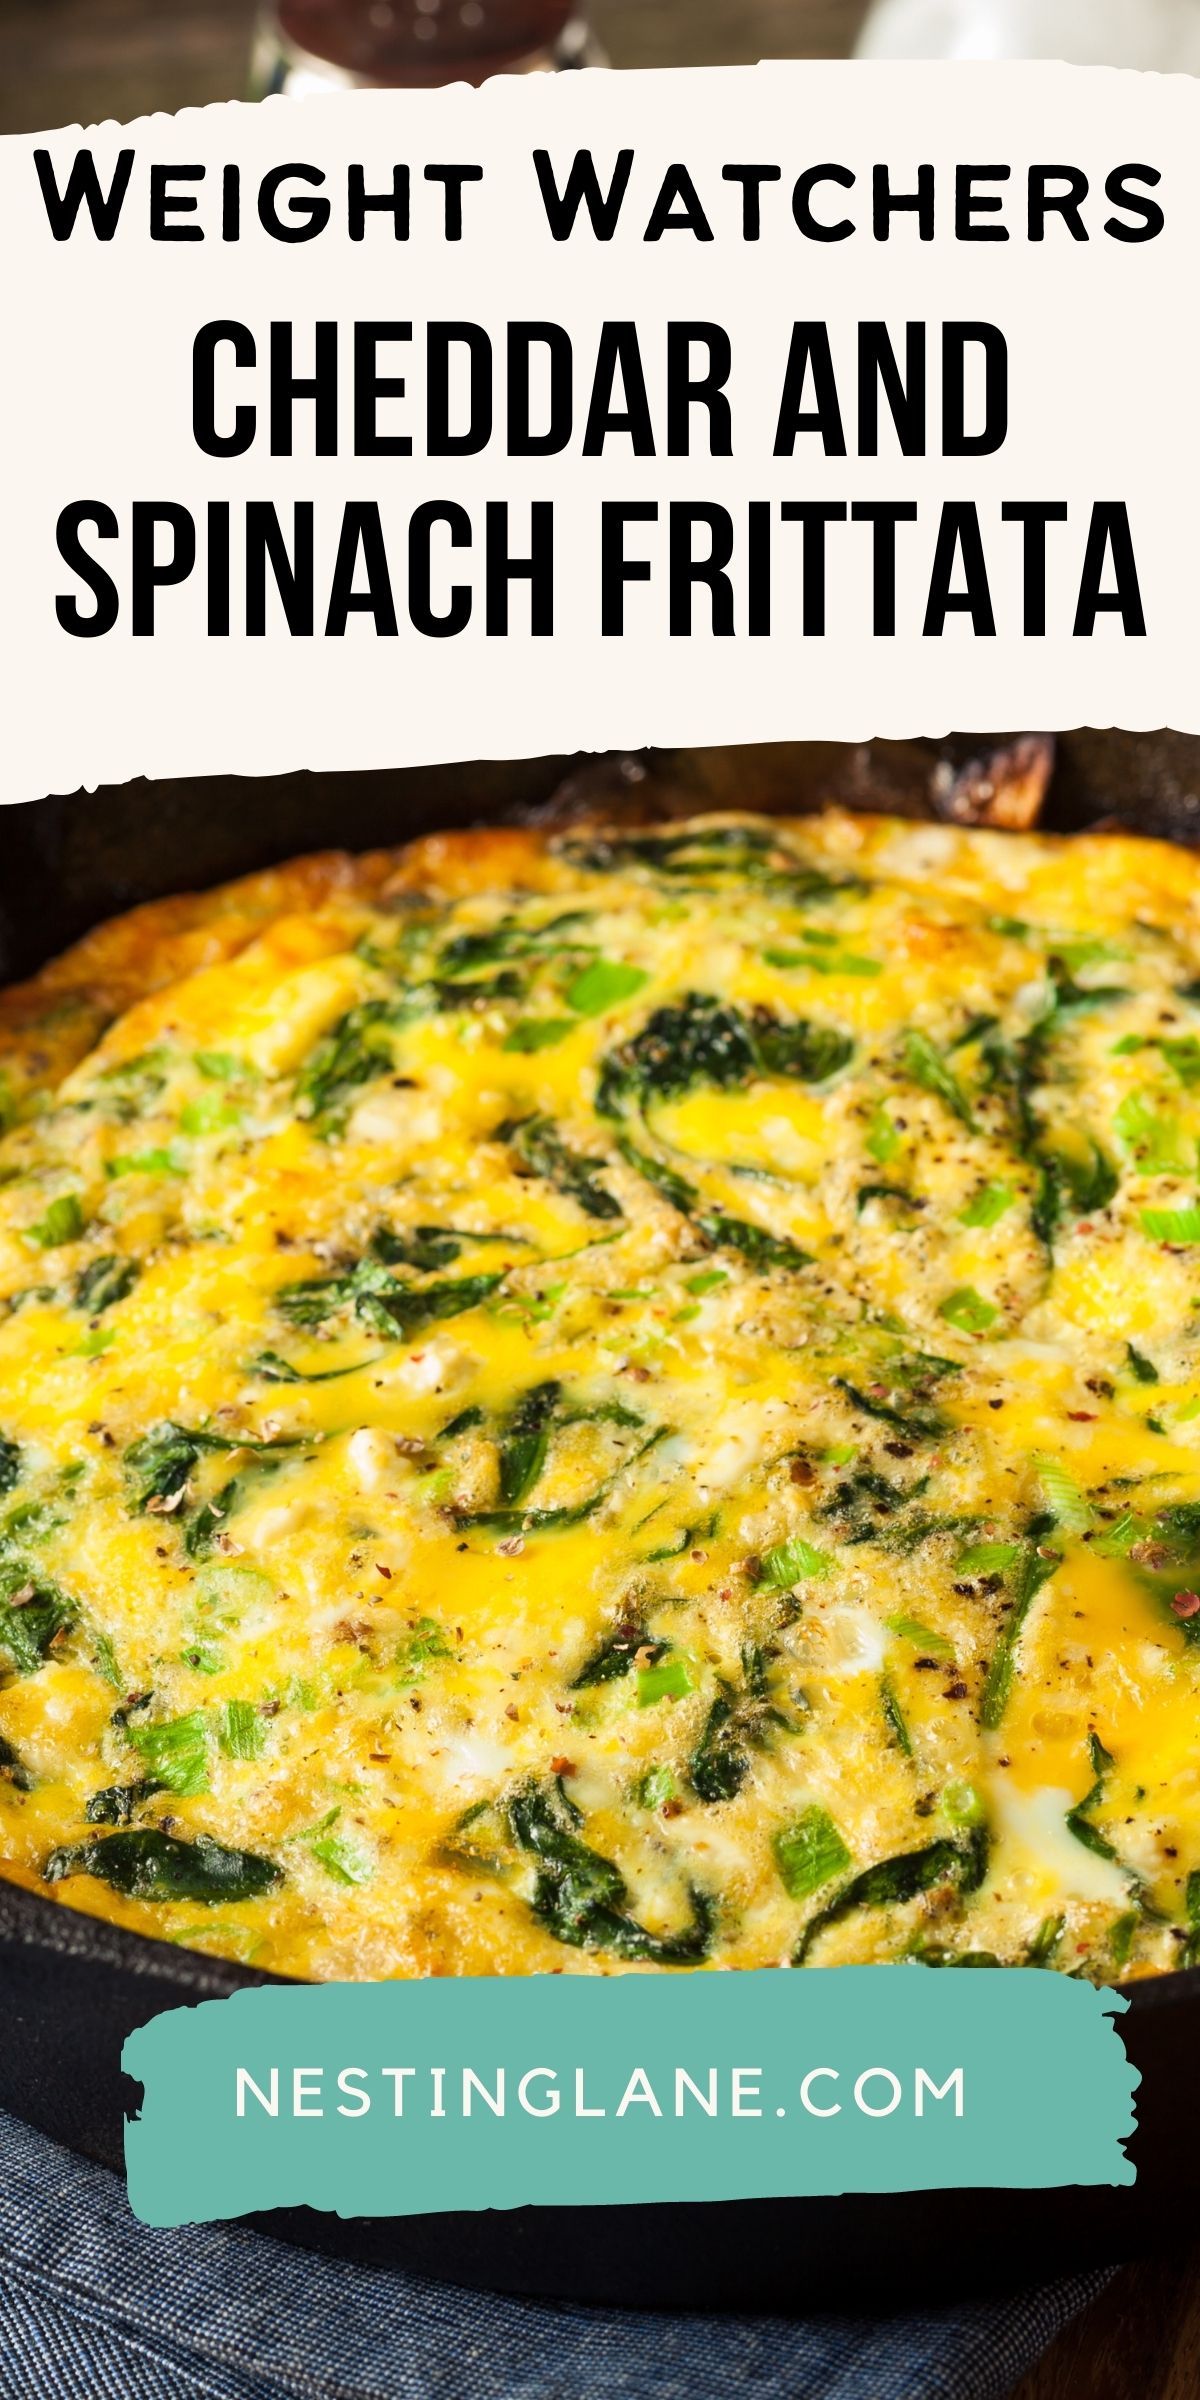 Cheddar And Spinach Frittata graphic.